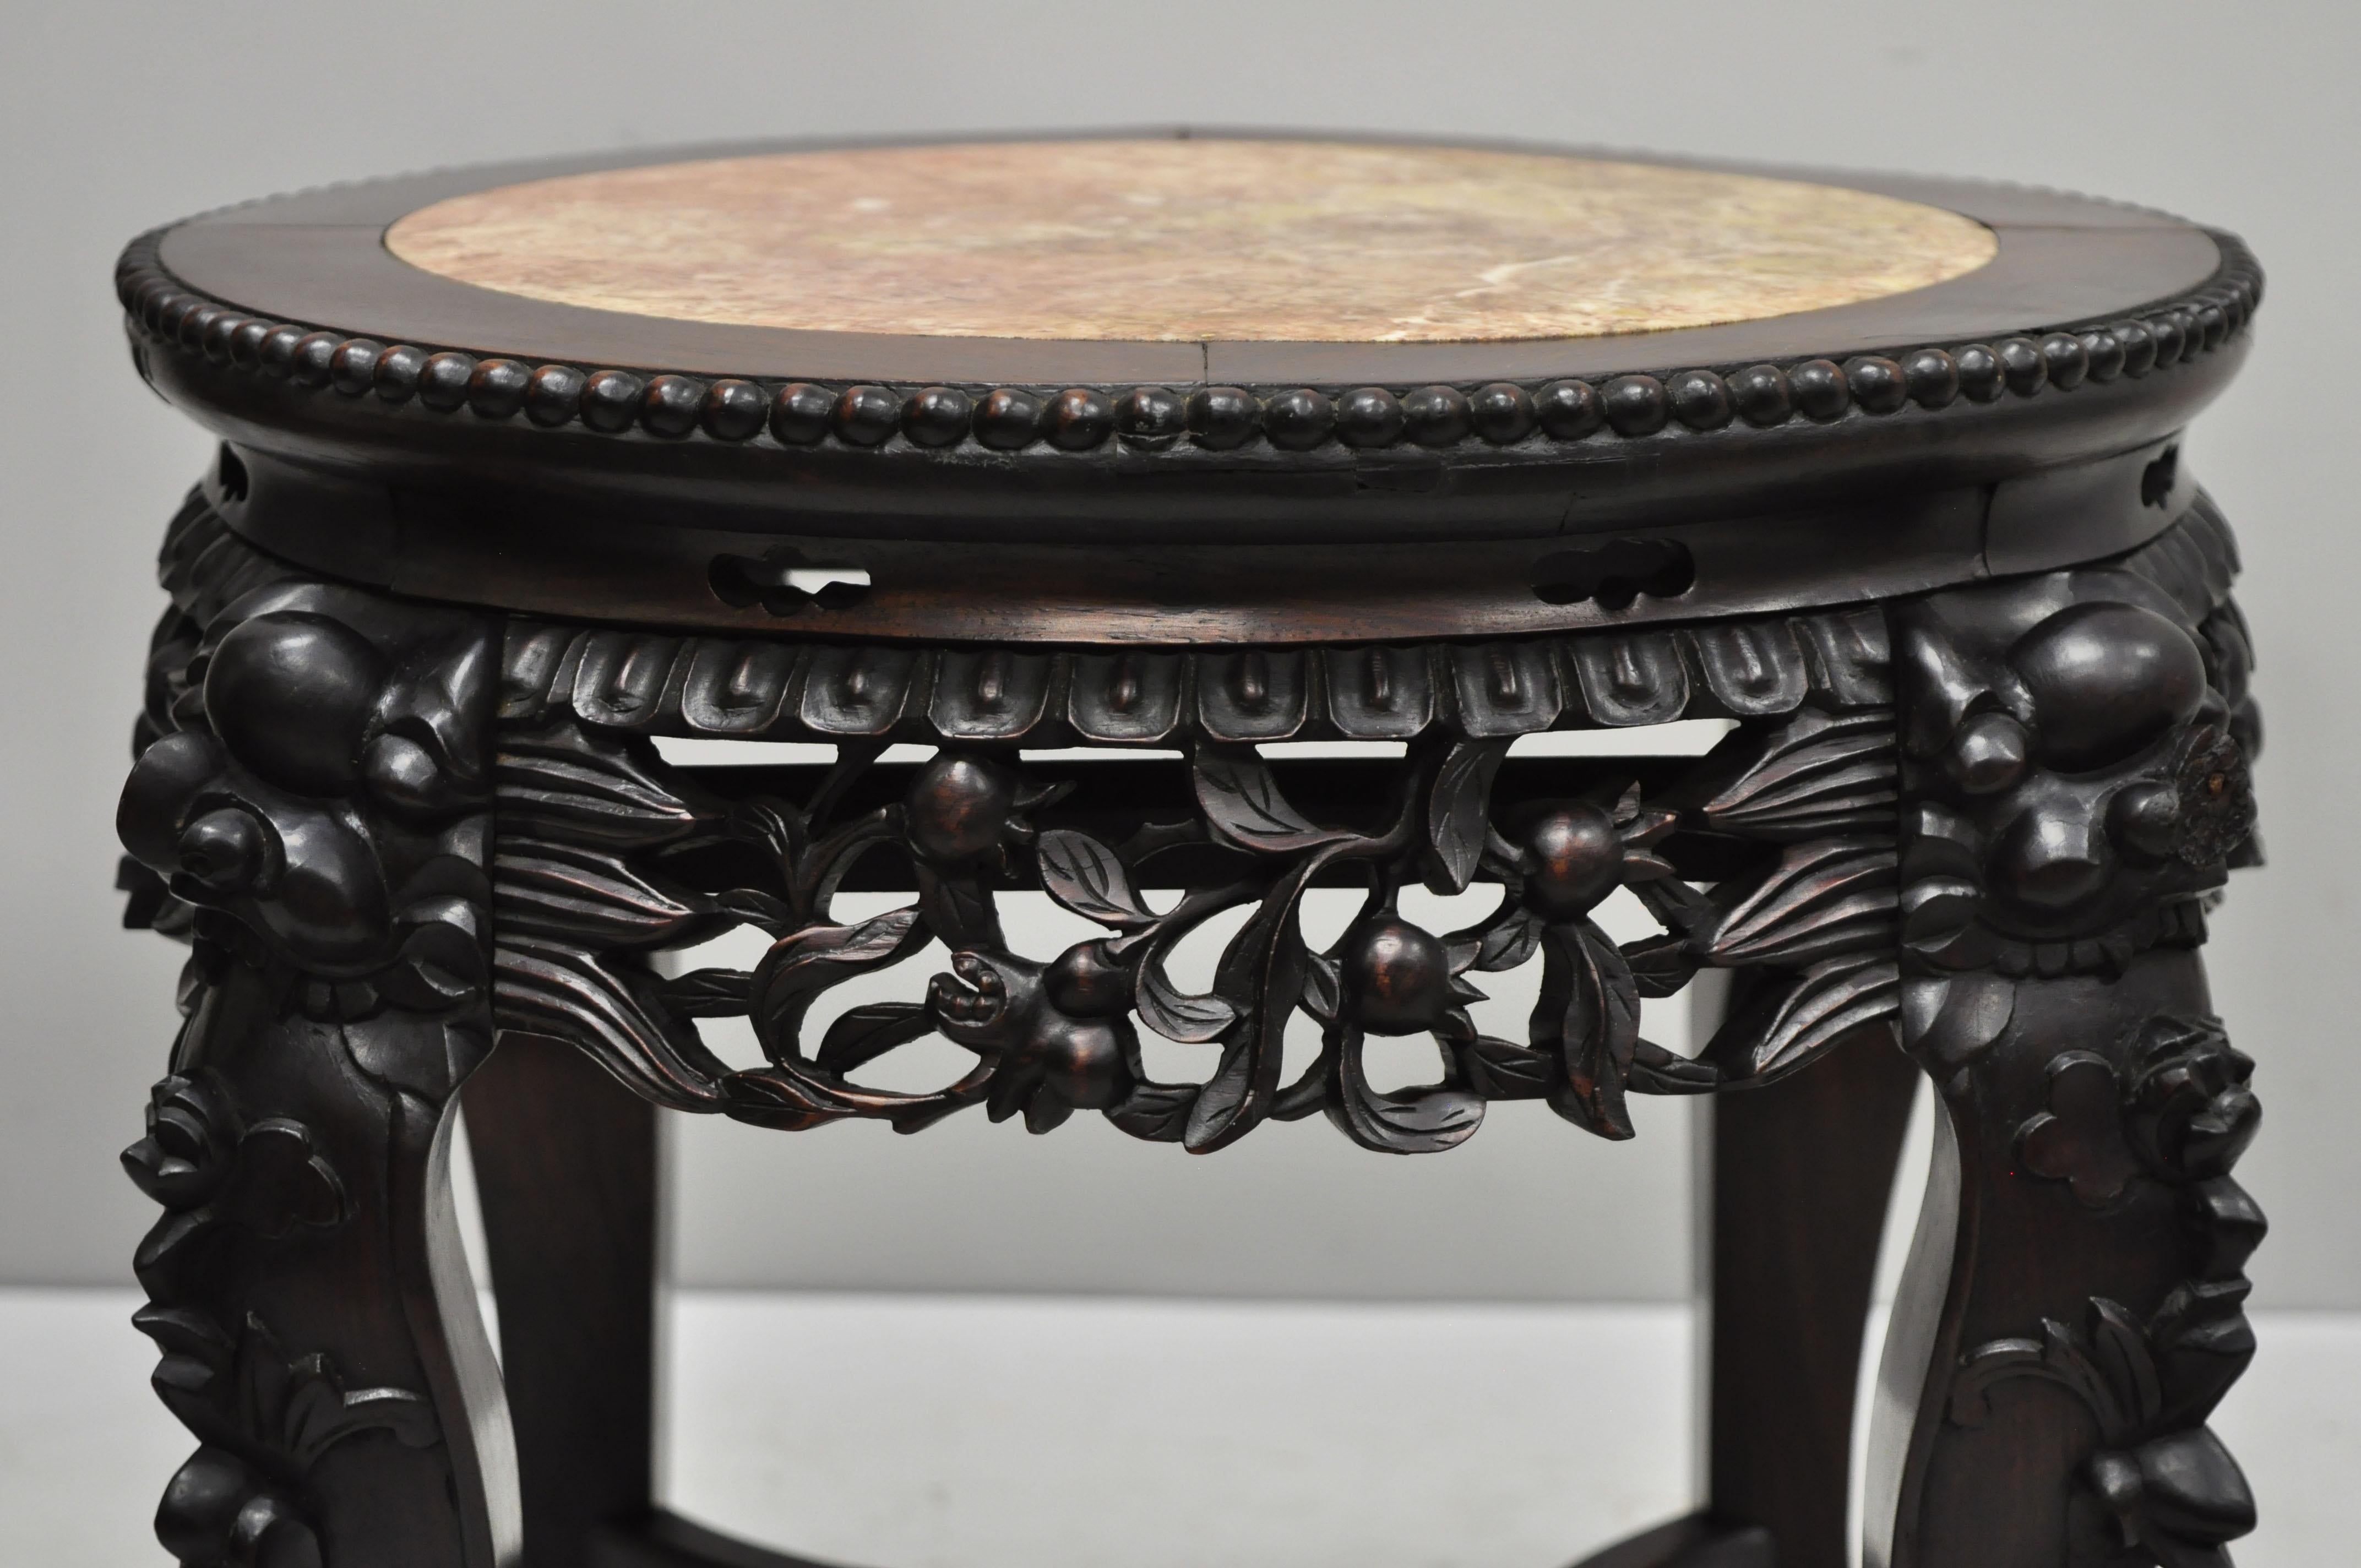 Chinoiserie Antique Carved Hardwood Rosewood Marble-Top Chinese Pedestal Table Plant Stand B